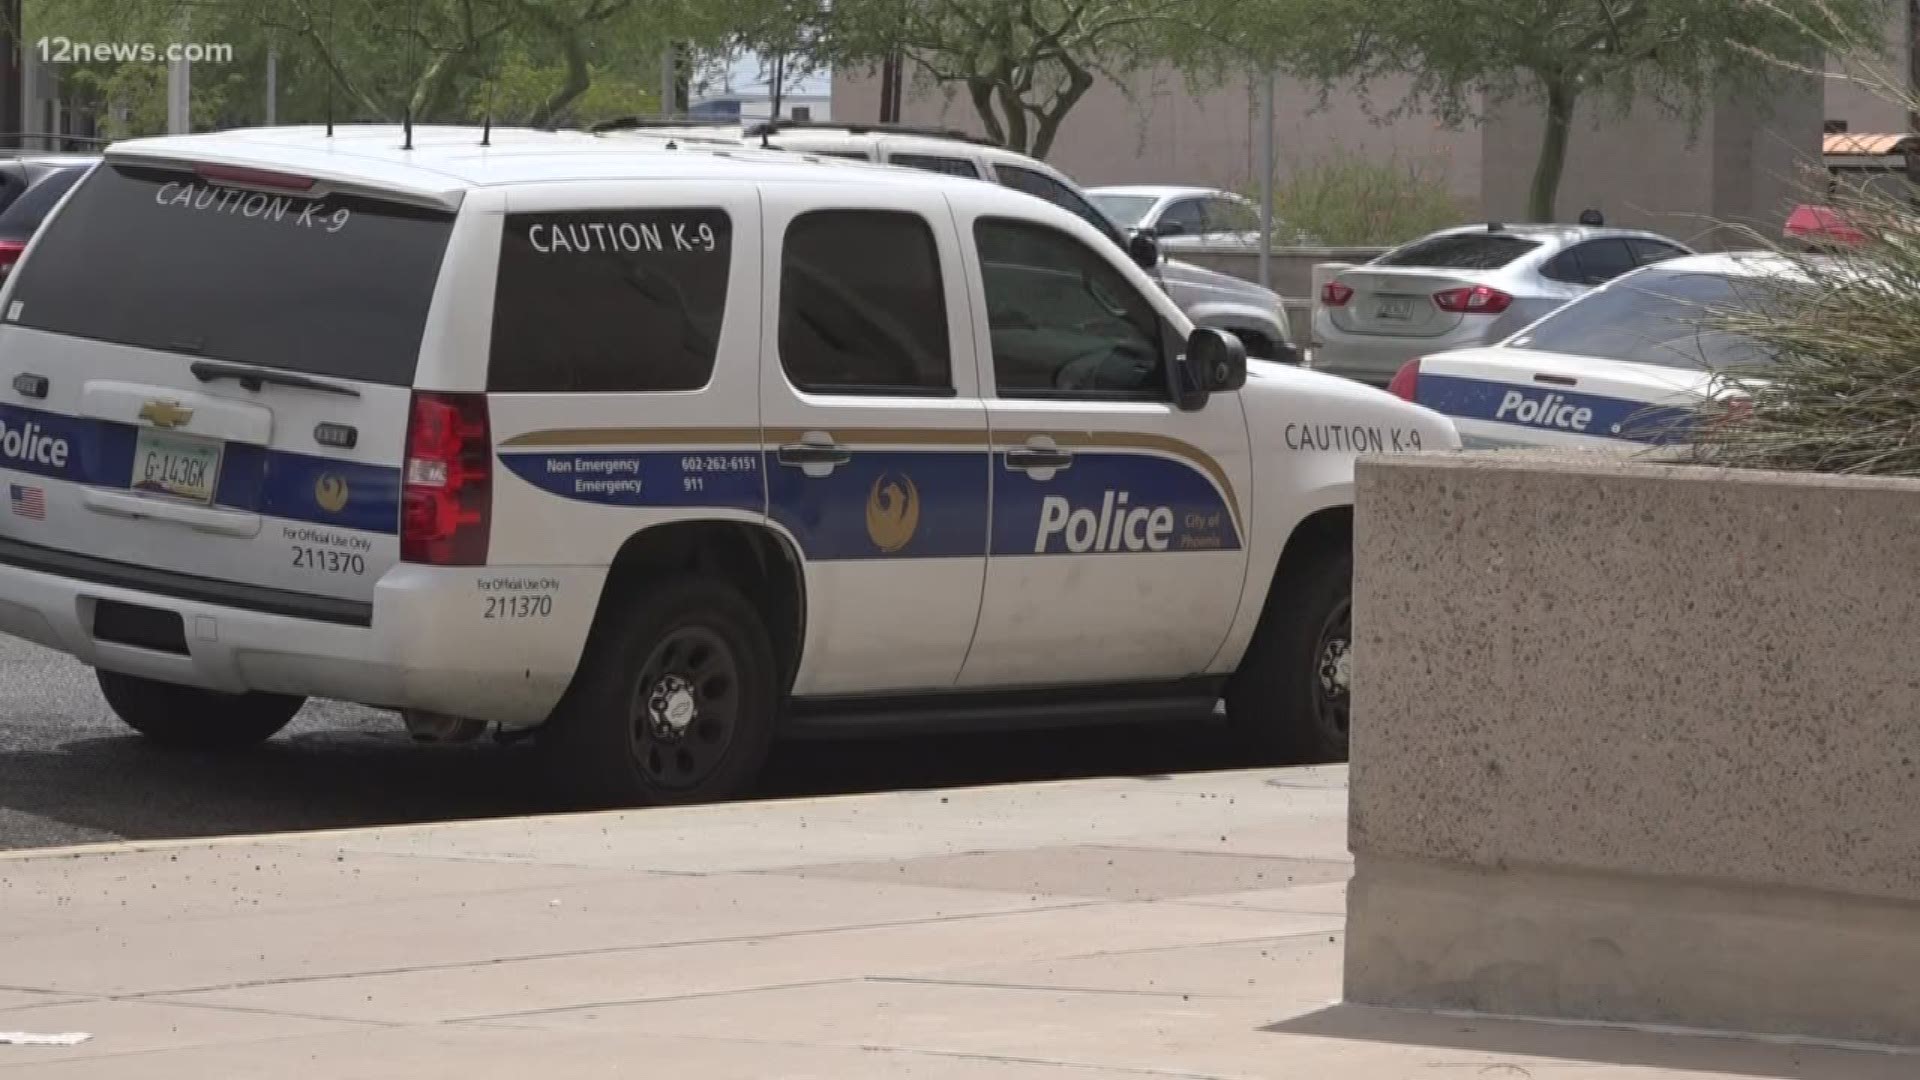 The Phoenix police department is being sued for discrimination by one of their own officers. The officer alleges in the lawsuit that higher-ups attempted to prevent her from transferring to another patrol with better hours because of her pregnancy.